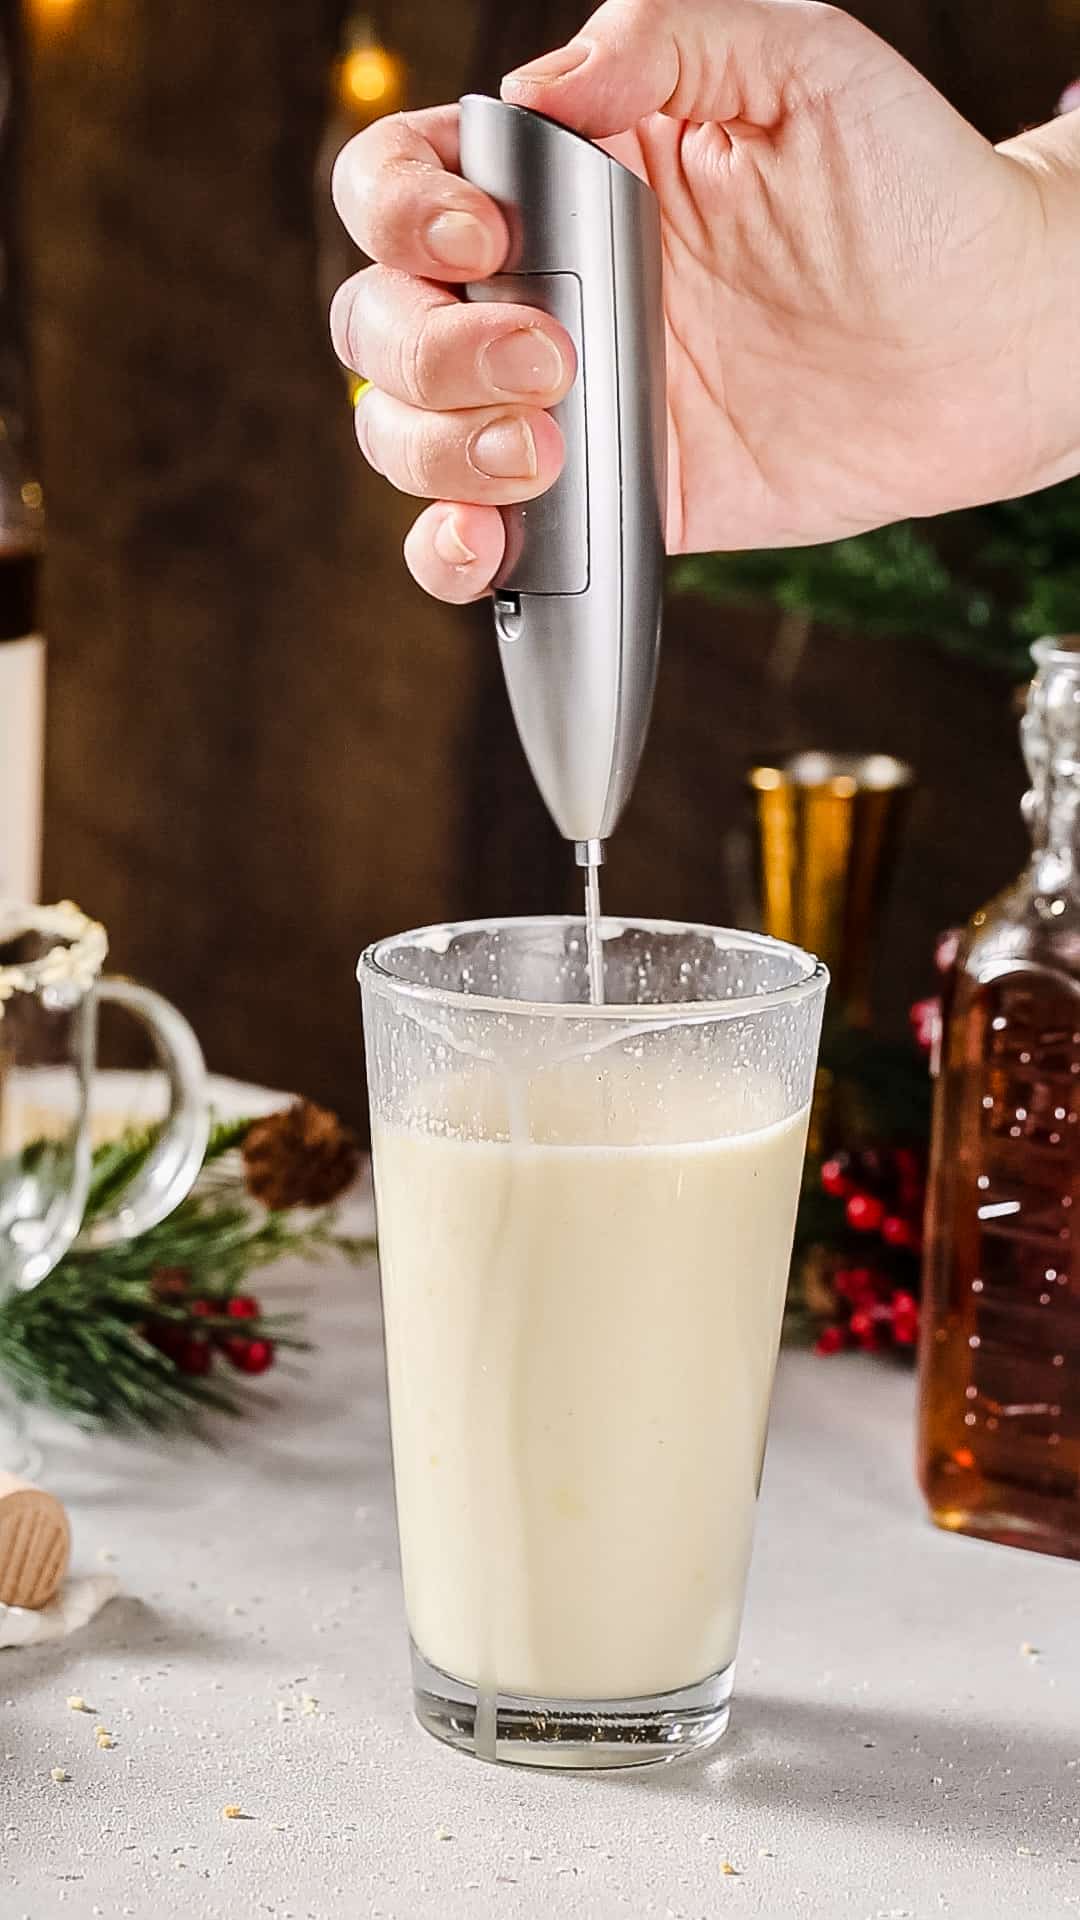 Hand using a milk frother to whip up the creamy cocktail in a cocktail shaker.